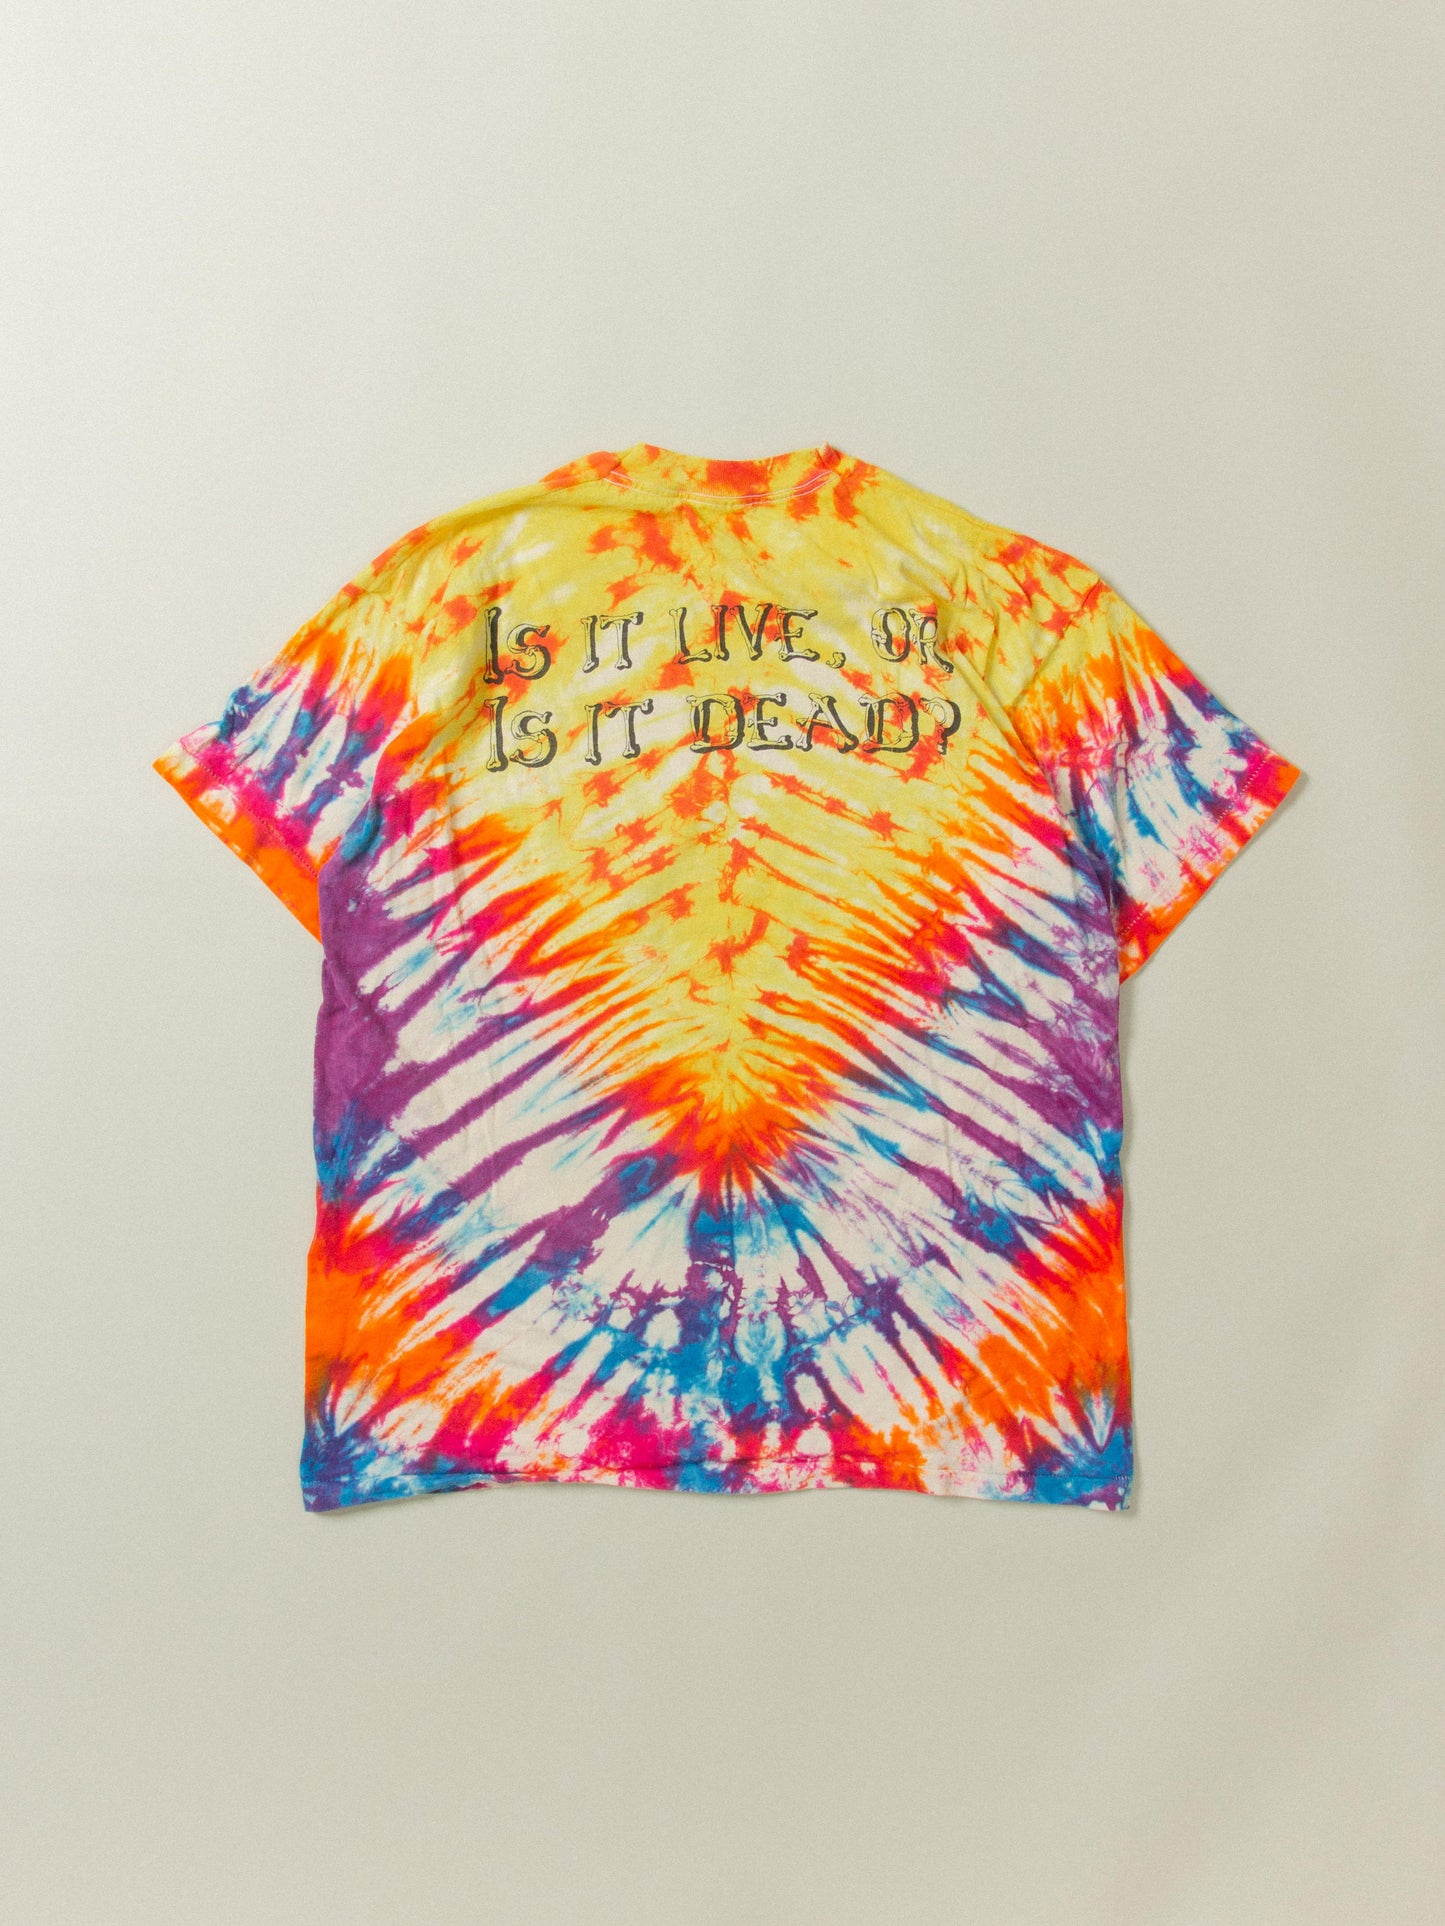 Vtg 1990s Grateful Dead Tee by Fruit of the Loom - Made in USA (L/XL)